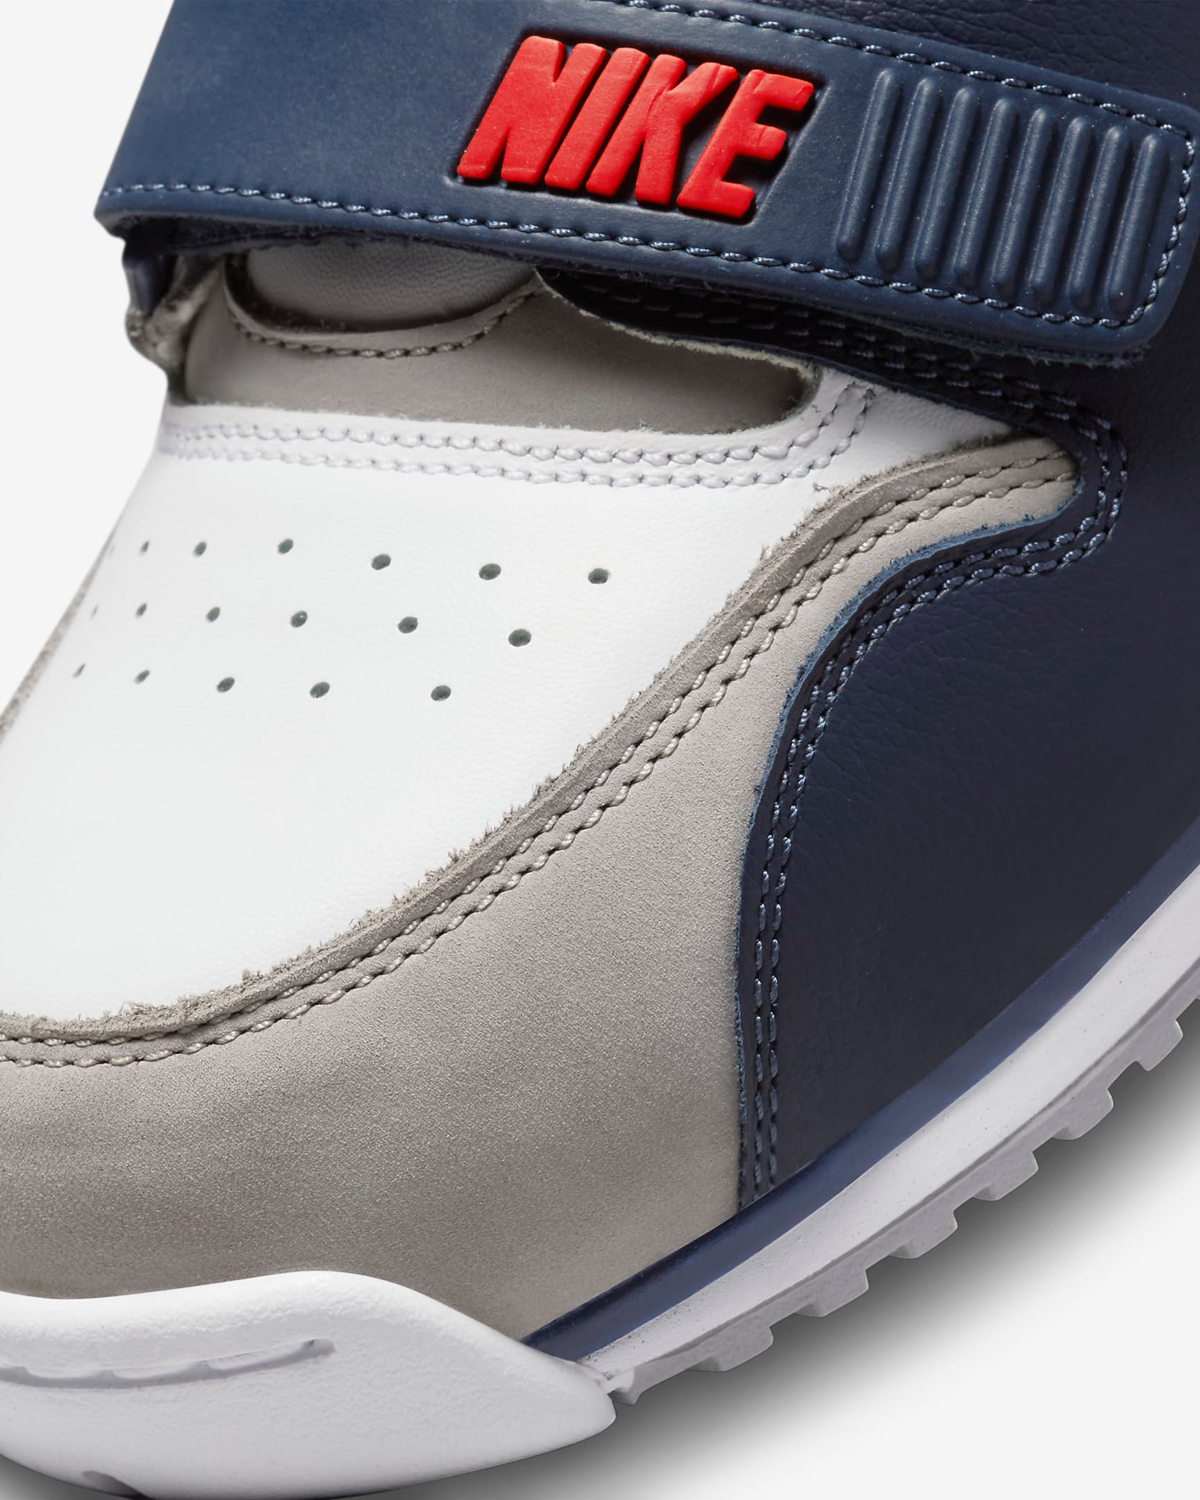 nike-air-trainer-1-midnight-navy-release-date-7